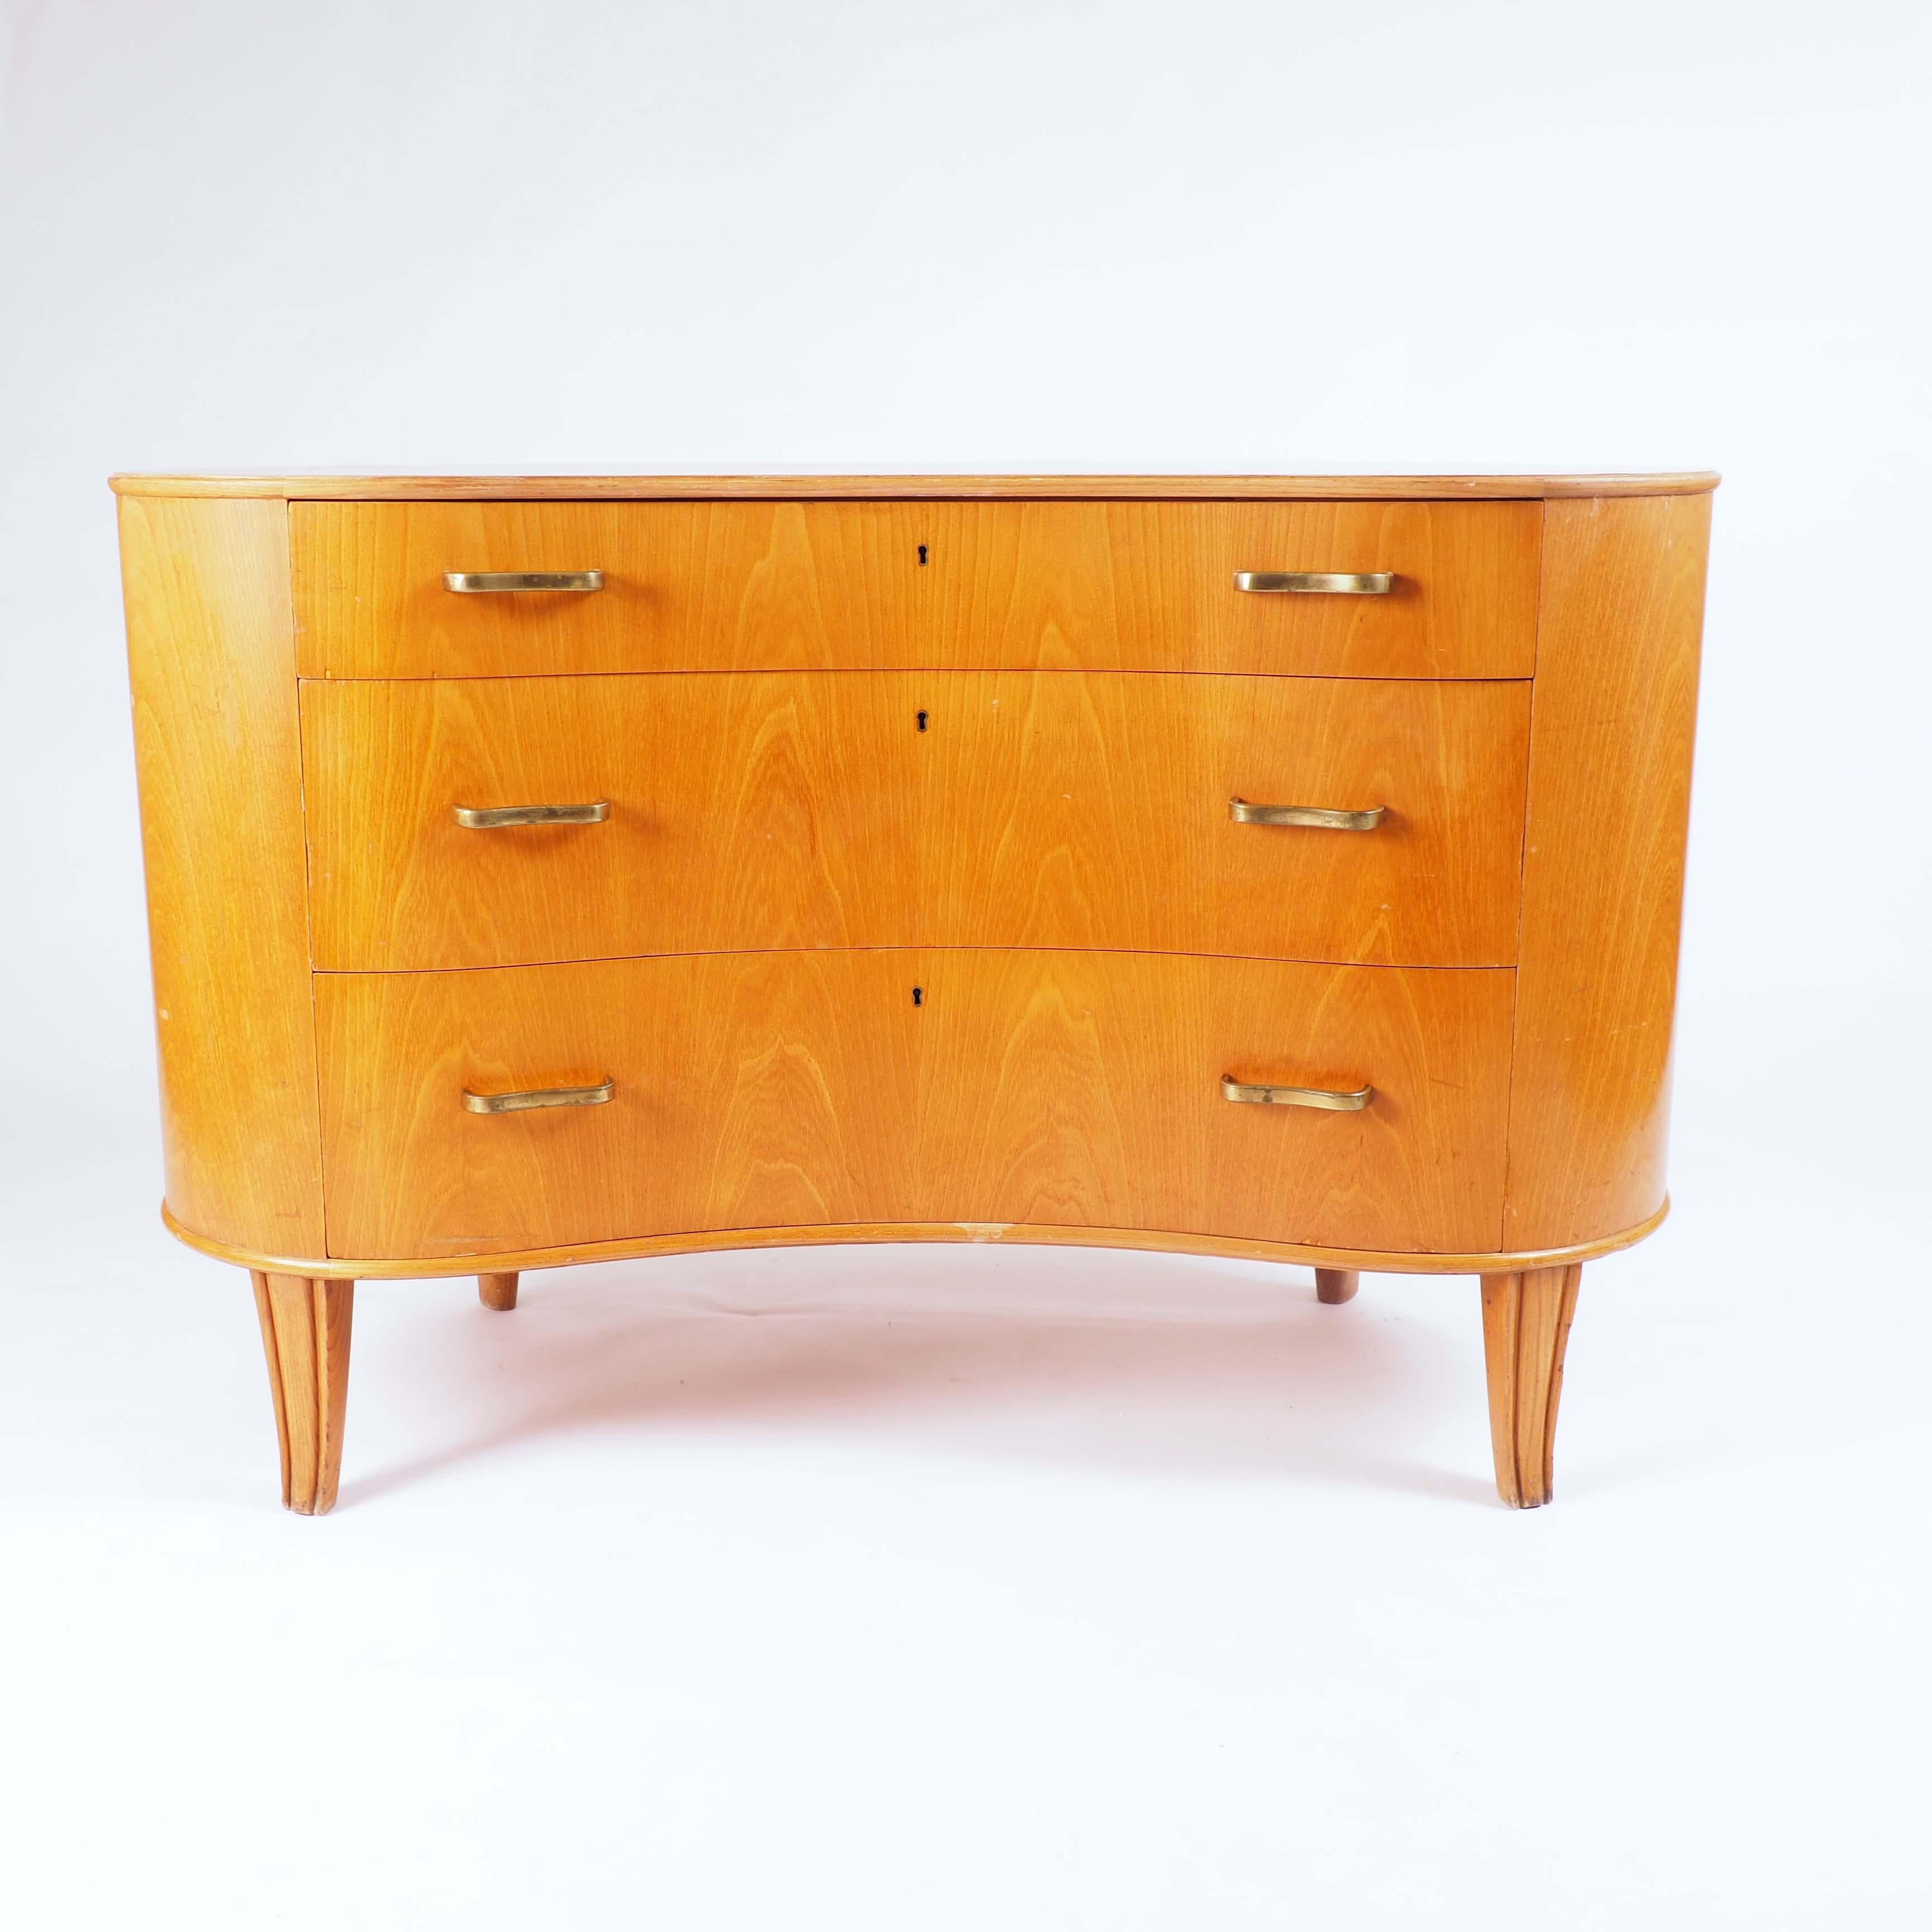 Rare kidney shaped chest of drawers in Elm by the Swedish designer Axel Larsson for Svenska Möbelfabrikerna in Bodafors. Axel Larsson designed the furniture for a number of public interiors, for example the Concert Hall of Gothenburg. The shape make